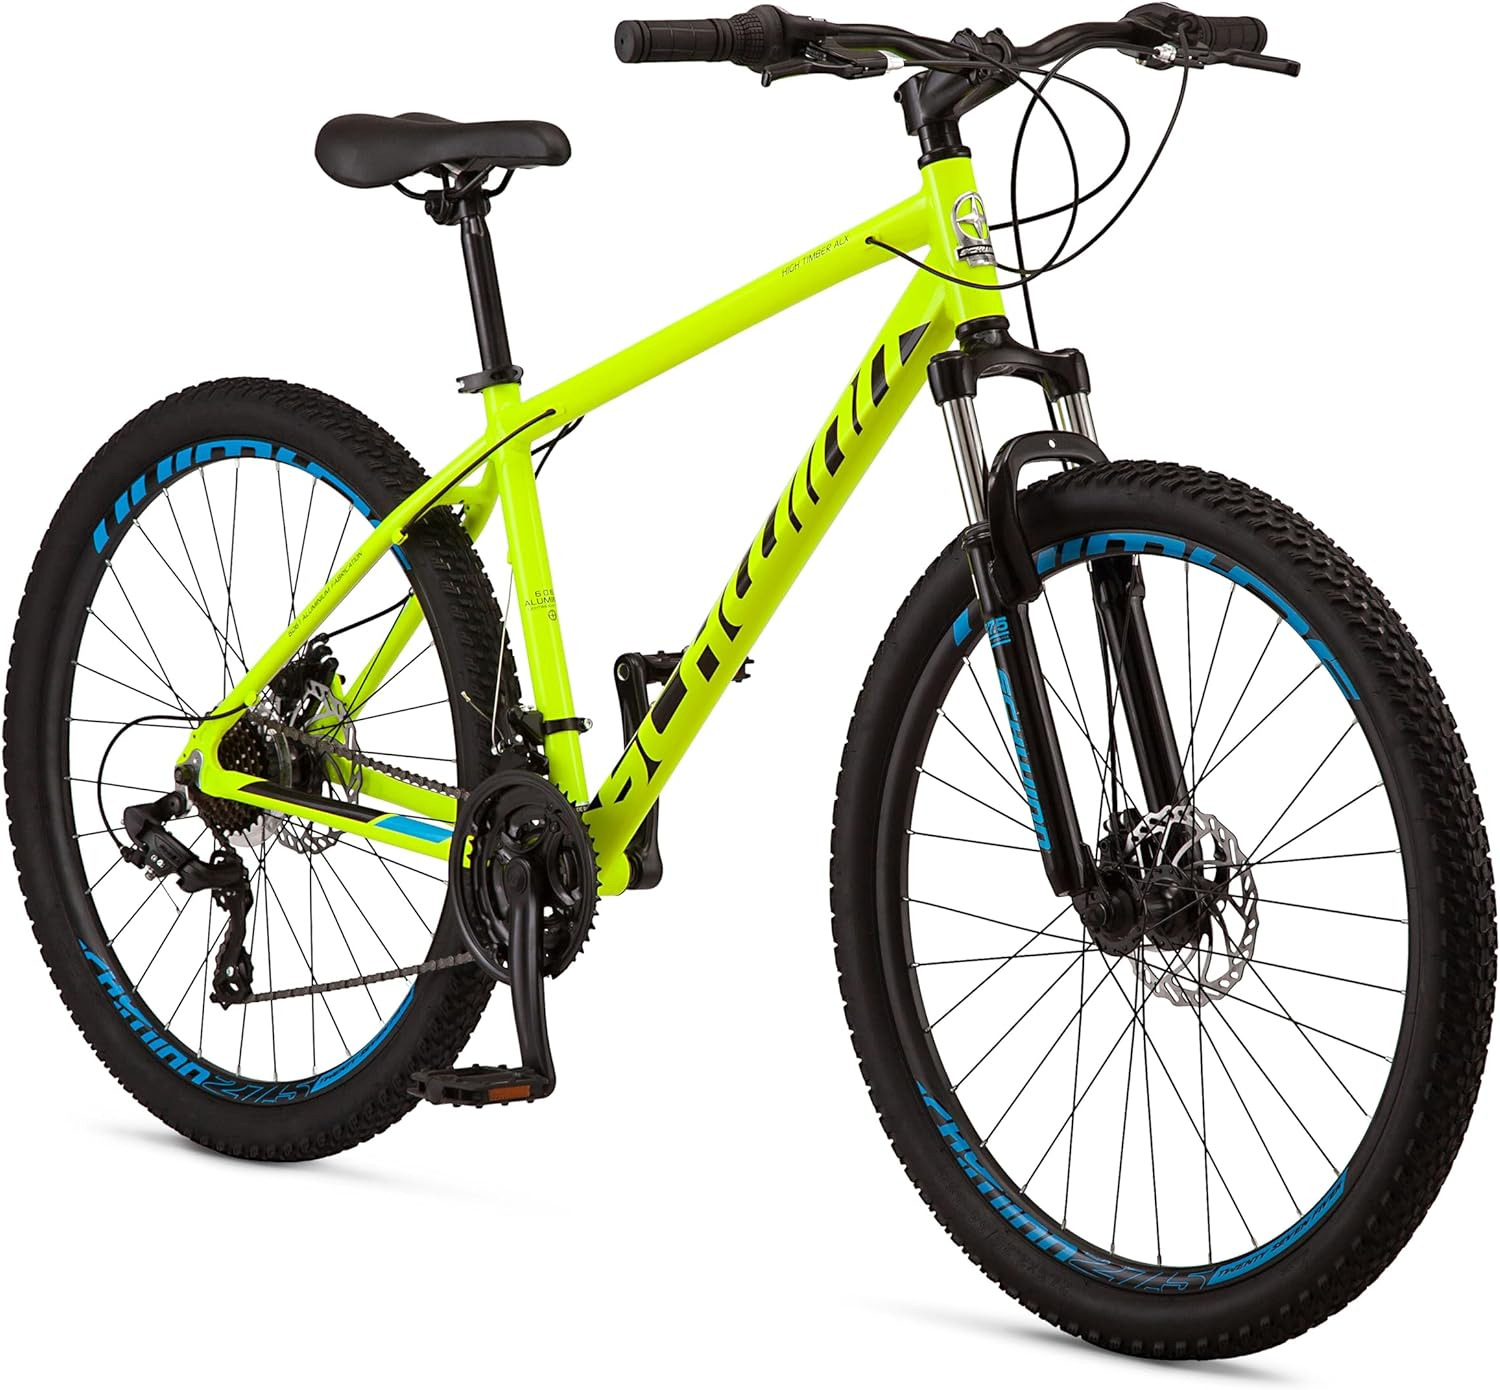 High Timber Youth/Adult Mountain Bike for Men and Women, Aluminum and Steel Fram